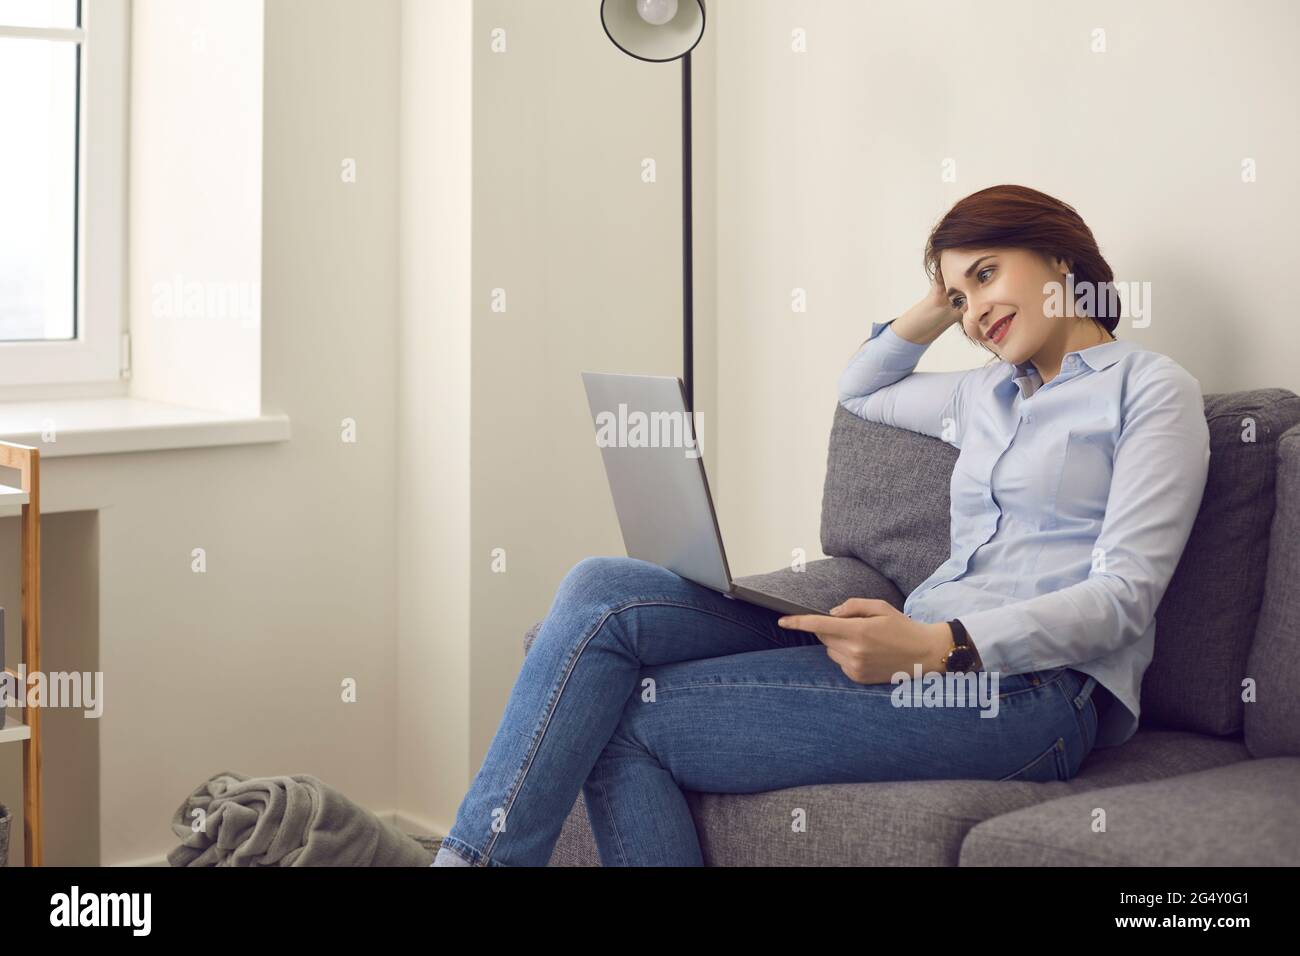 Smiling millennial woman looking at laptop screen relax on couch at home Stock Photo